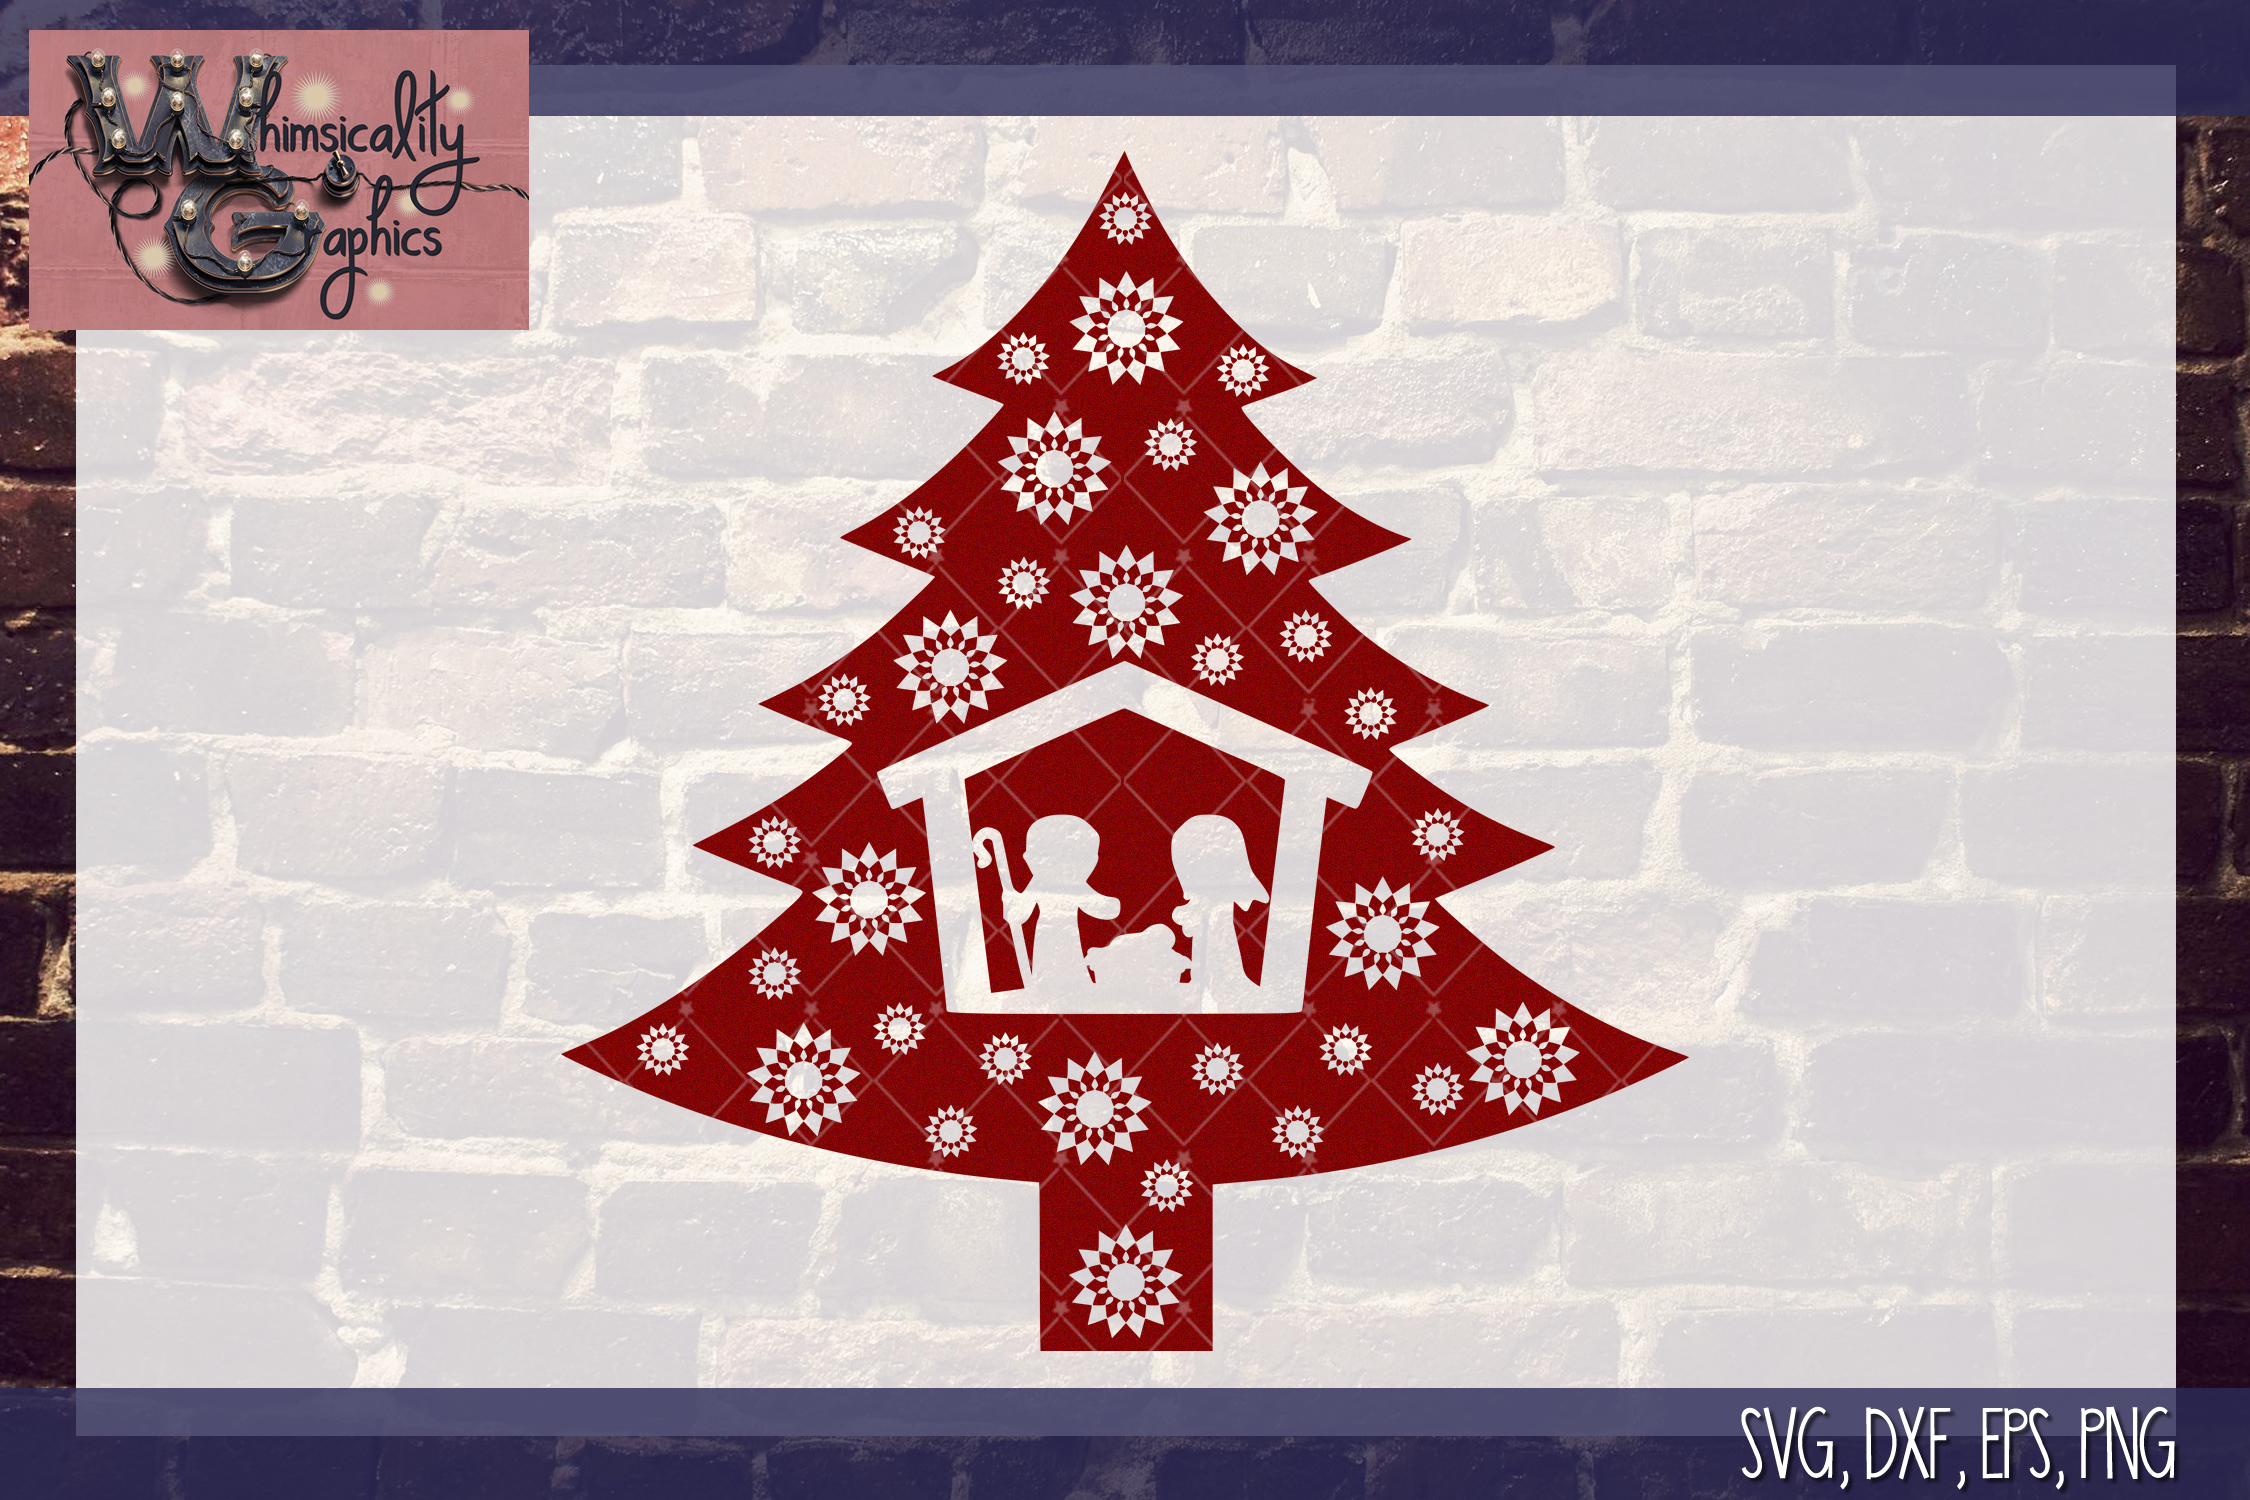 Download Christmas Tree Nativity SVG, DXF, PNG, EPS Comm (119411 ...